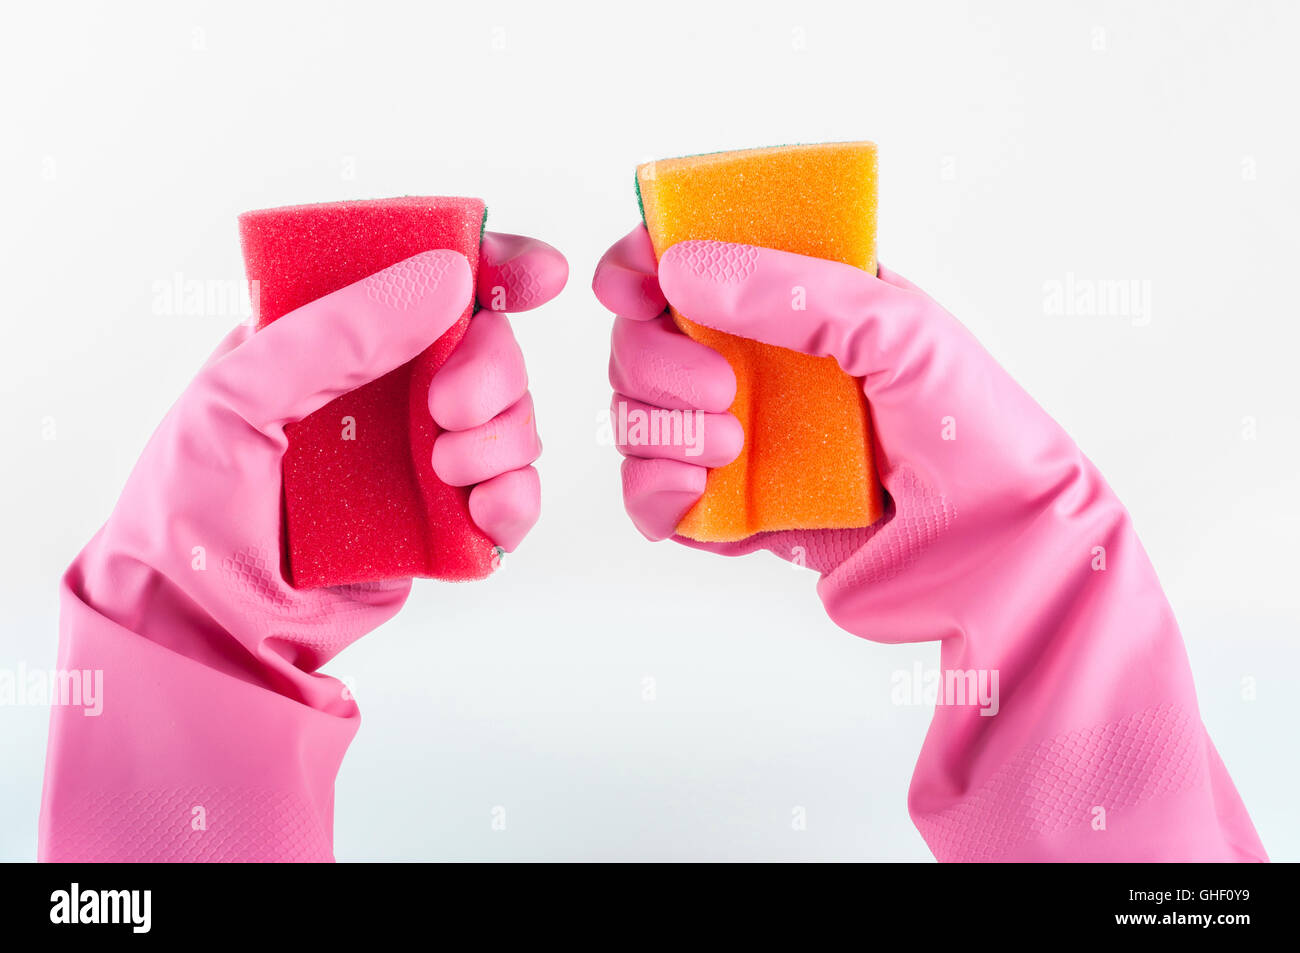 rubber gloves with sponge on a white background Stock Photo